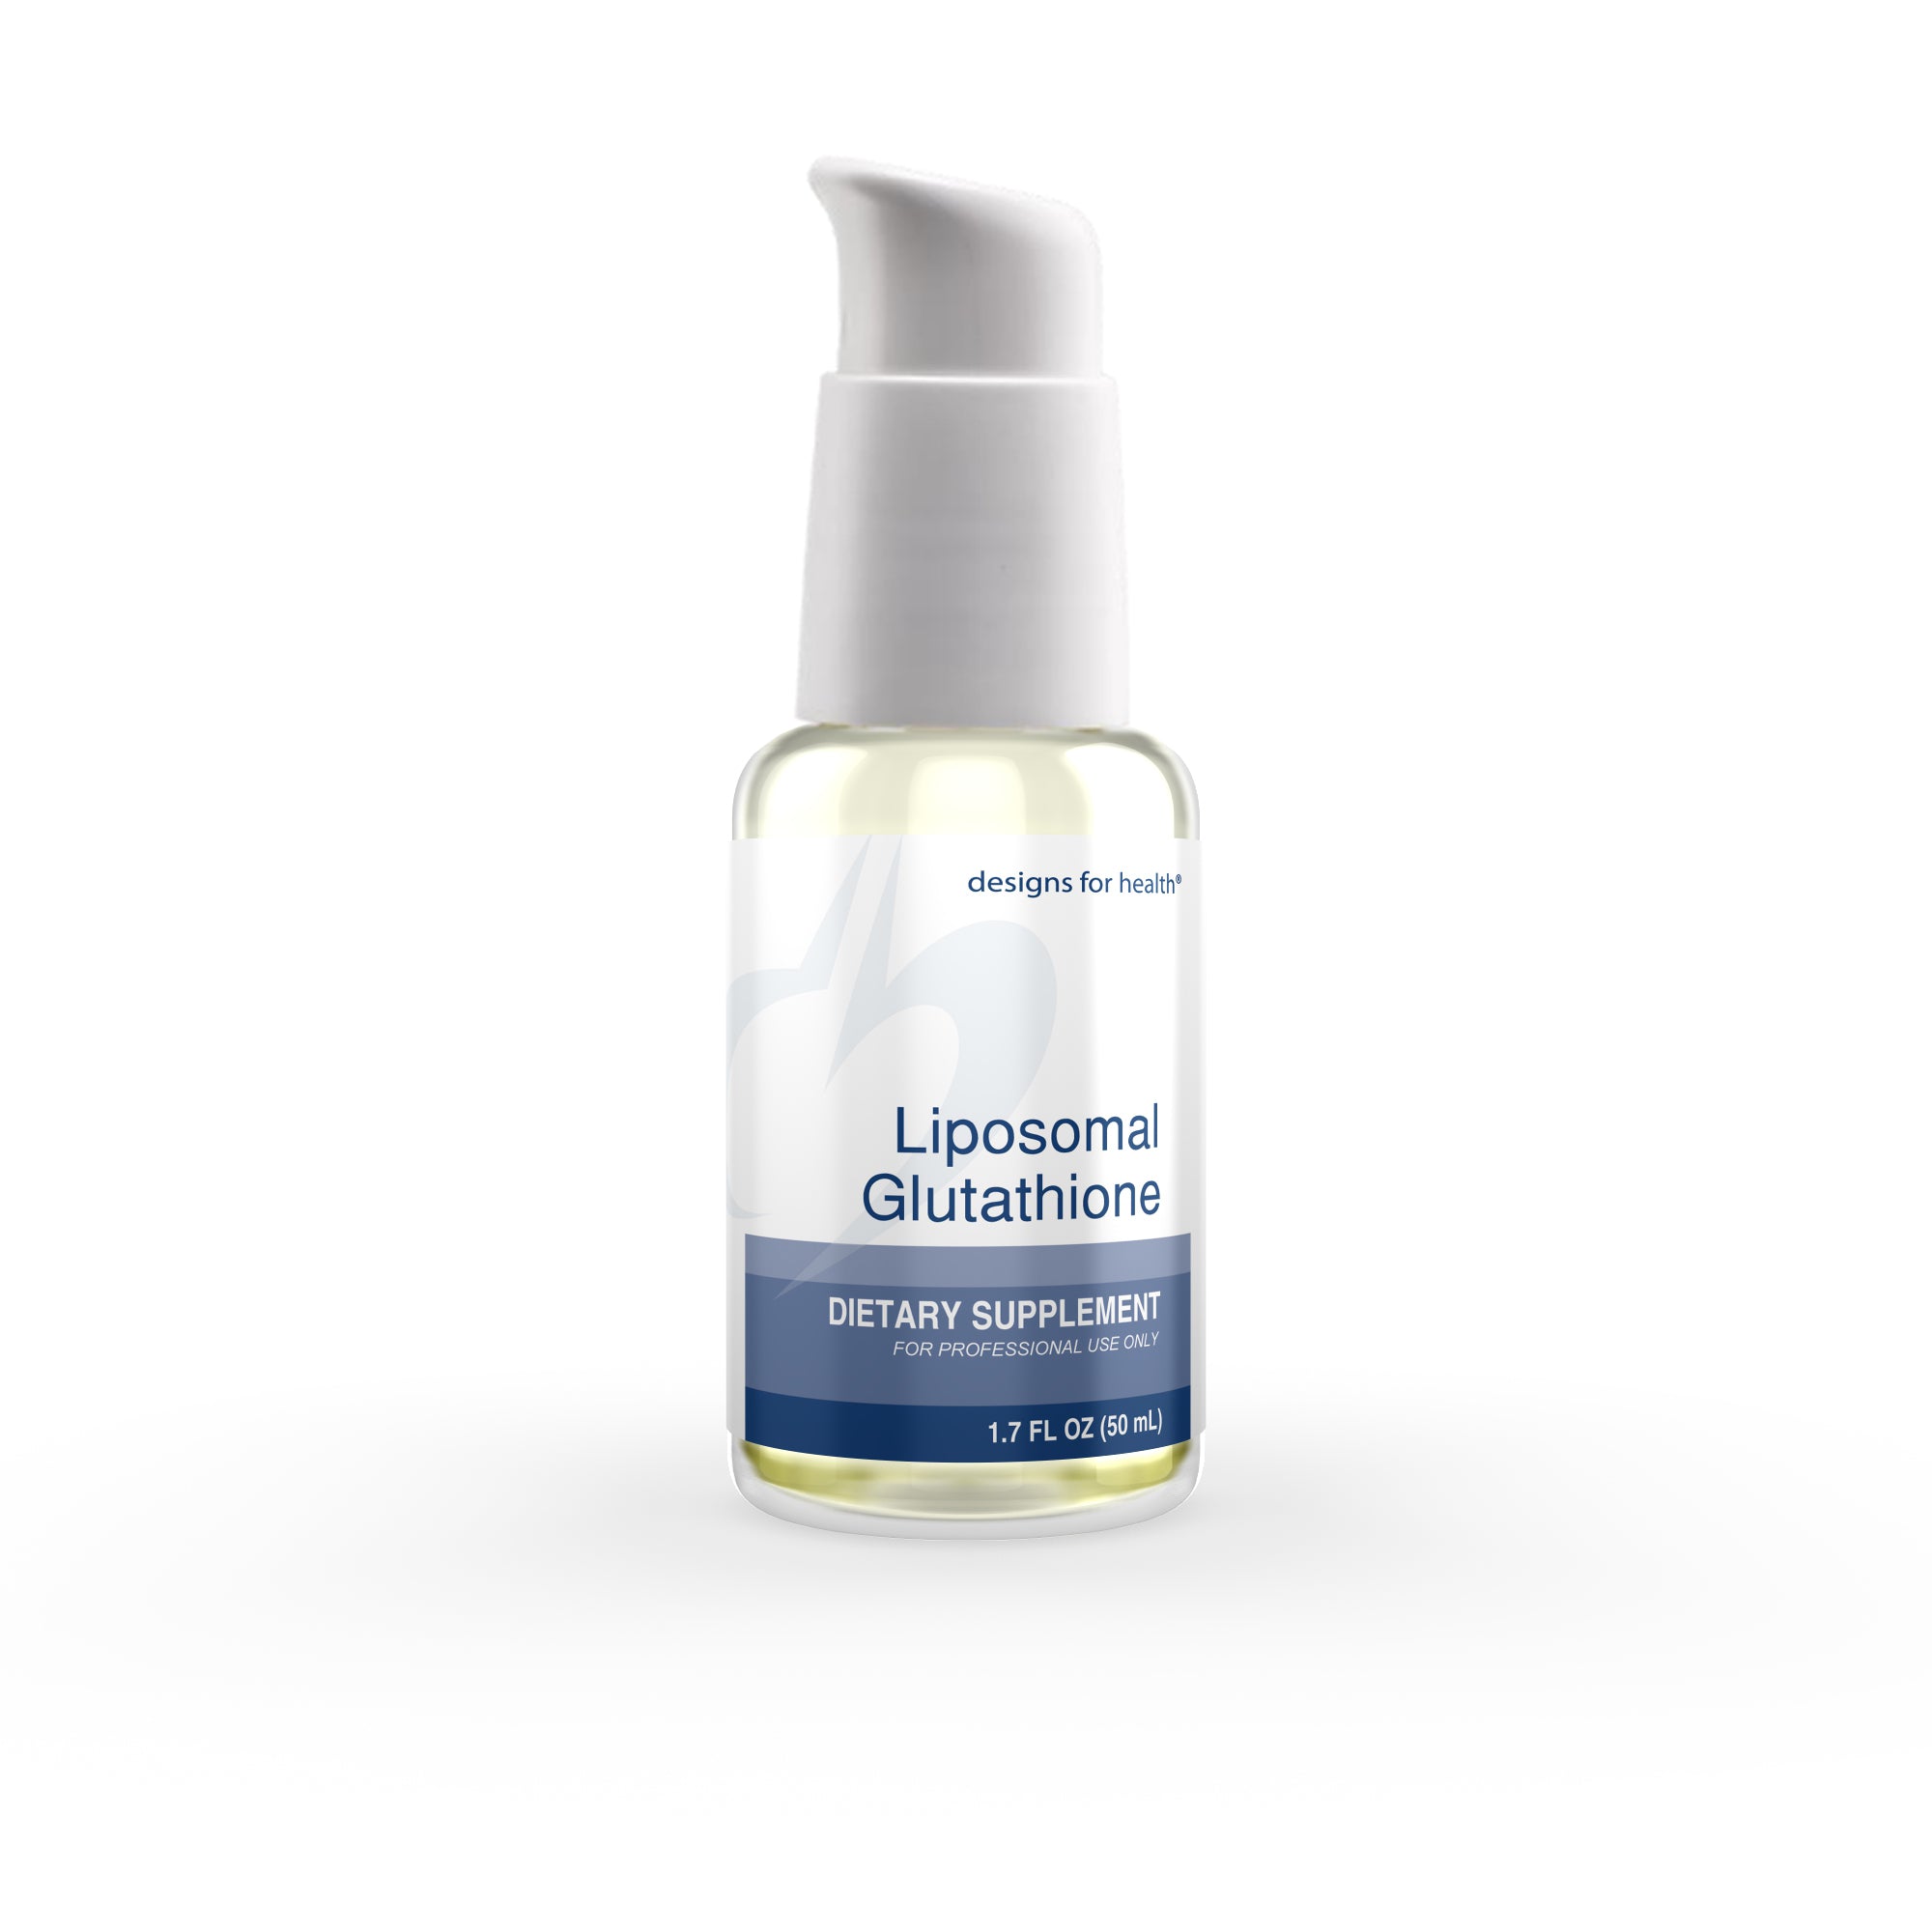 Liposomal Glutathione (Available In-Office Only - Requires Refrigeration)